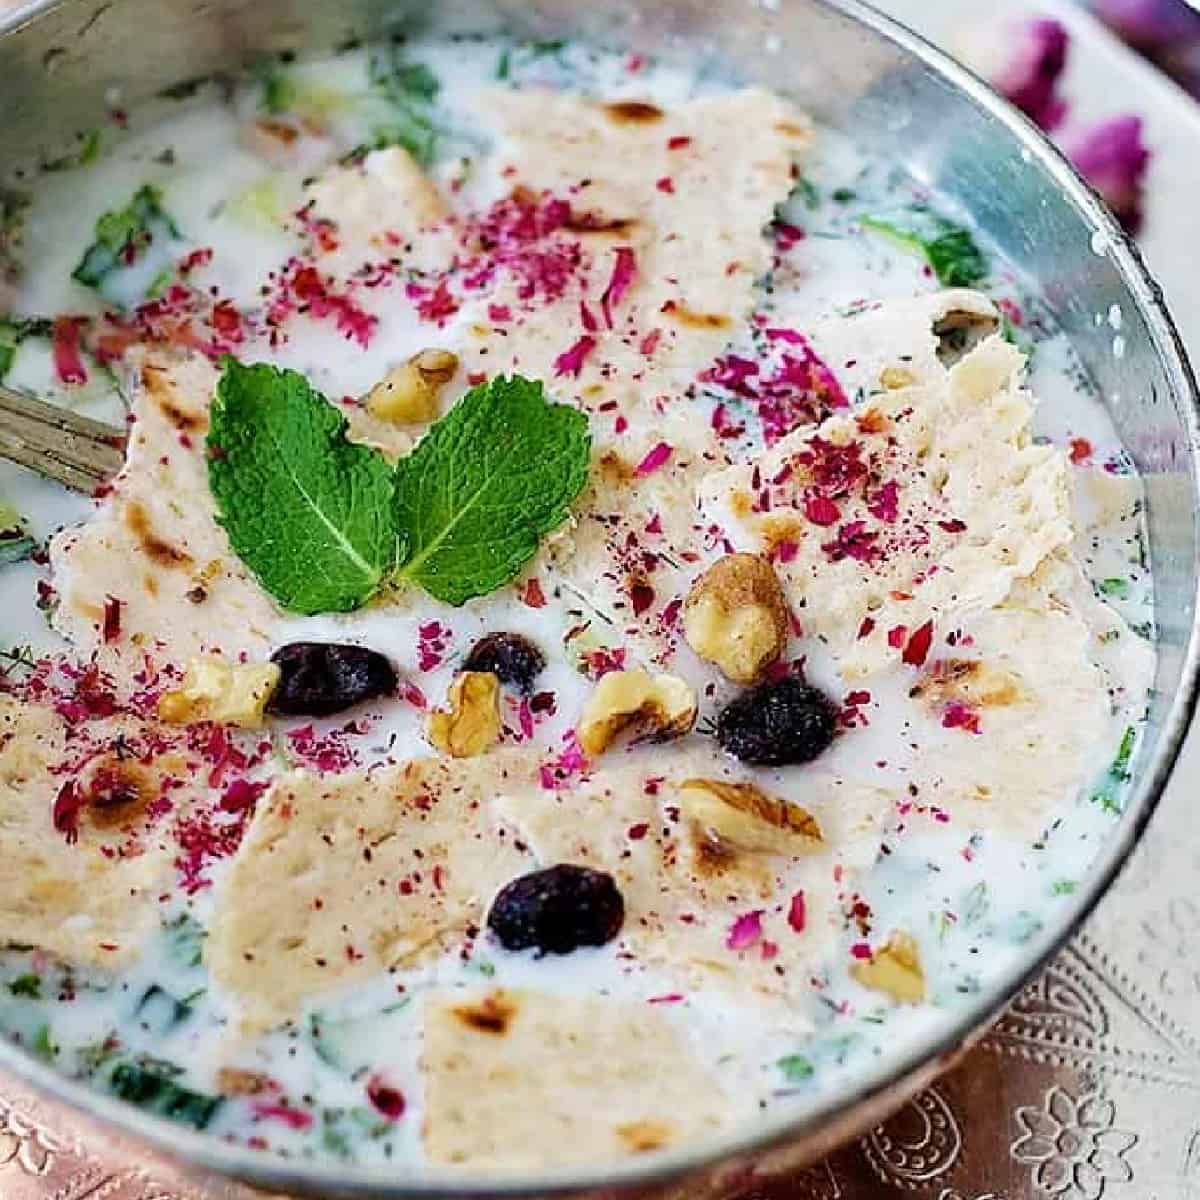 Stay cool this summer with this Persian Cold Yogurt Soup - Abdoogh Khiar. This tasty yogurt soup is made with simple, natural and healthy ingredients and is ready in 15 minutes.
